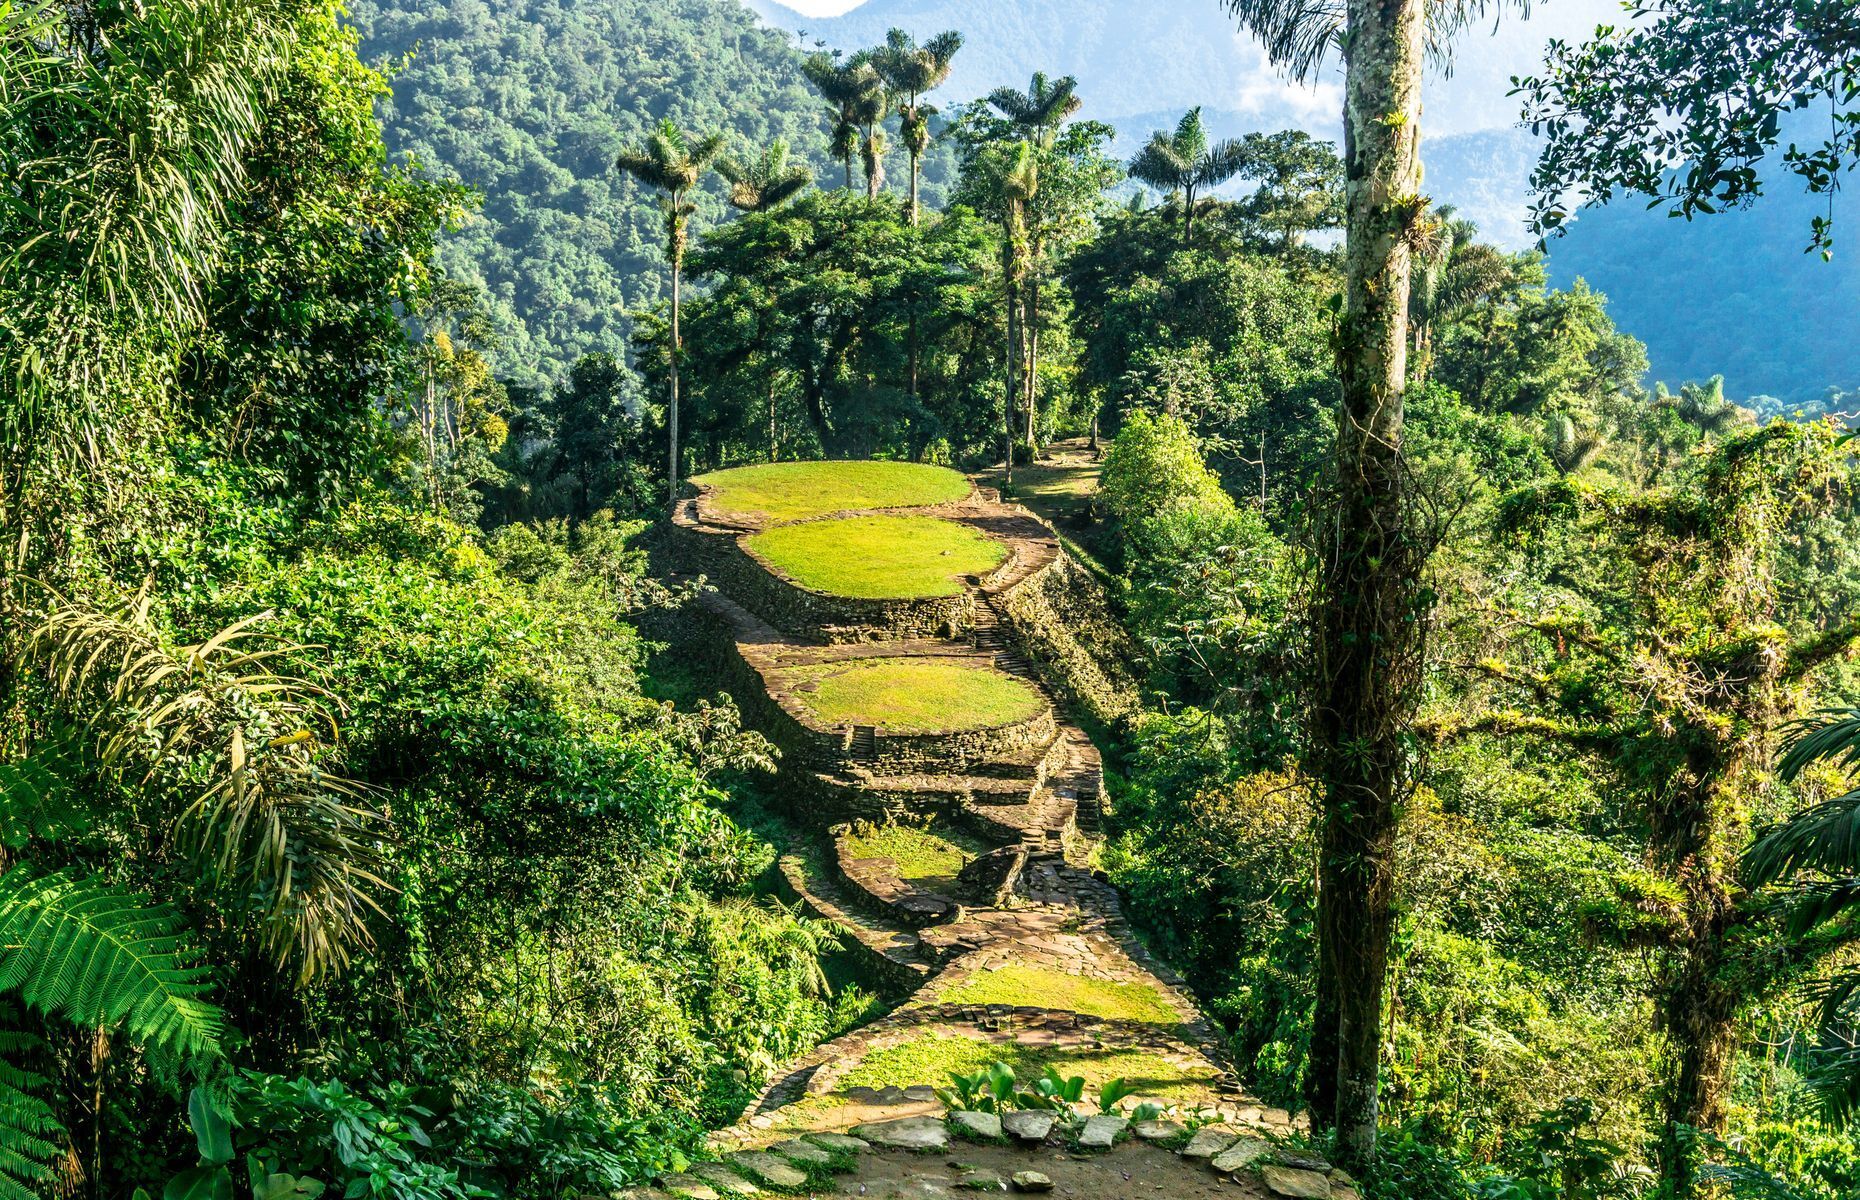 <p>To get to this <a href="https://colombia.travel/en/blog/ciudad-perdida-gateway-past-sierra-nevada-de-santa-marta" rel="noreferrer noopener">lost city</a> you’ll need to complete a multi-day guided hike of more than 44 kilometres through the mountains of the Sierra Nevada de Santa Marta. Its remote location explains why this lush jungle was only rediscovered in the 1970s. According to scientists, this area was likely home to one of the biggest pre-Columbian settlements in the Americas.</p>